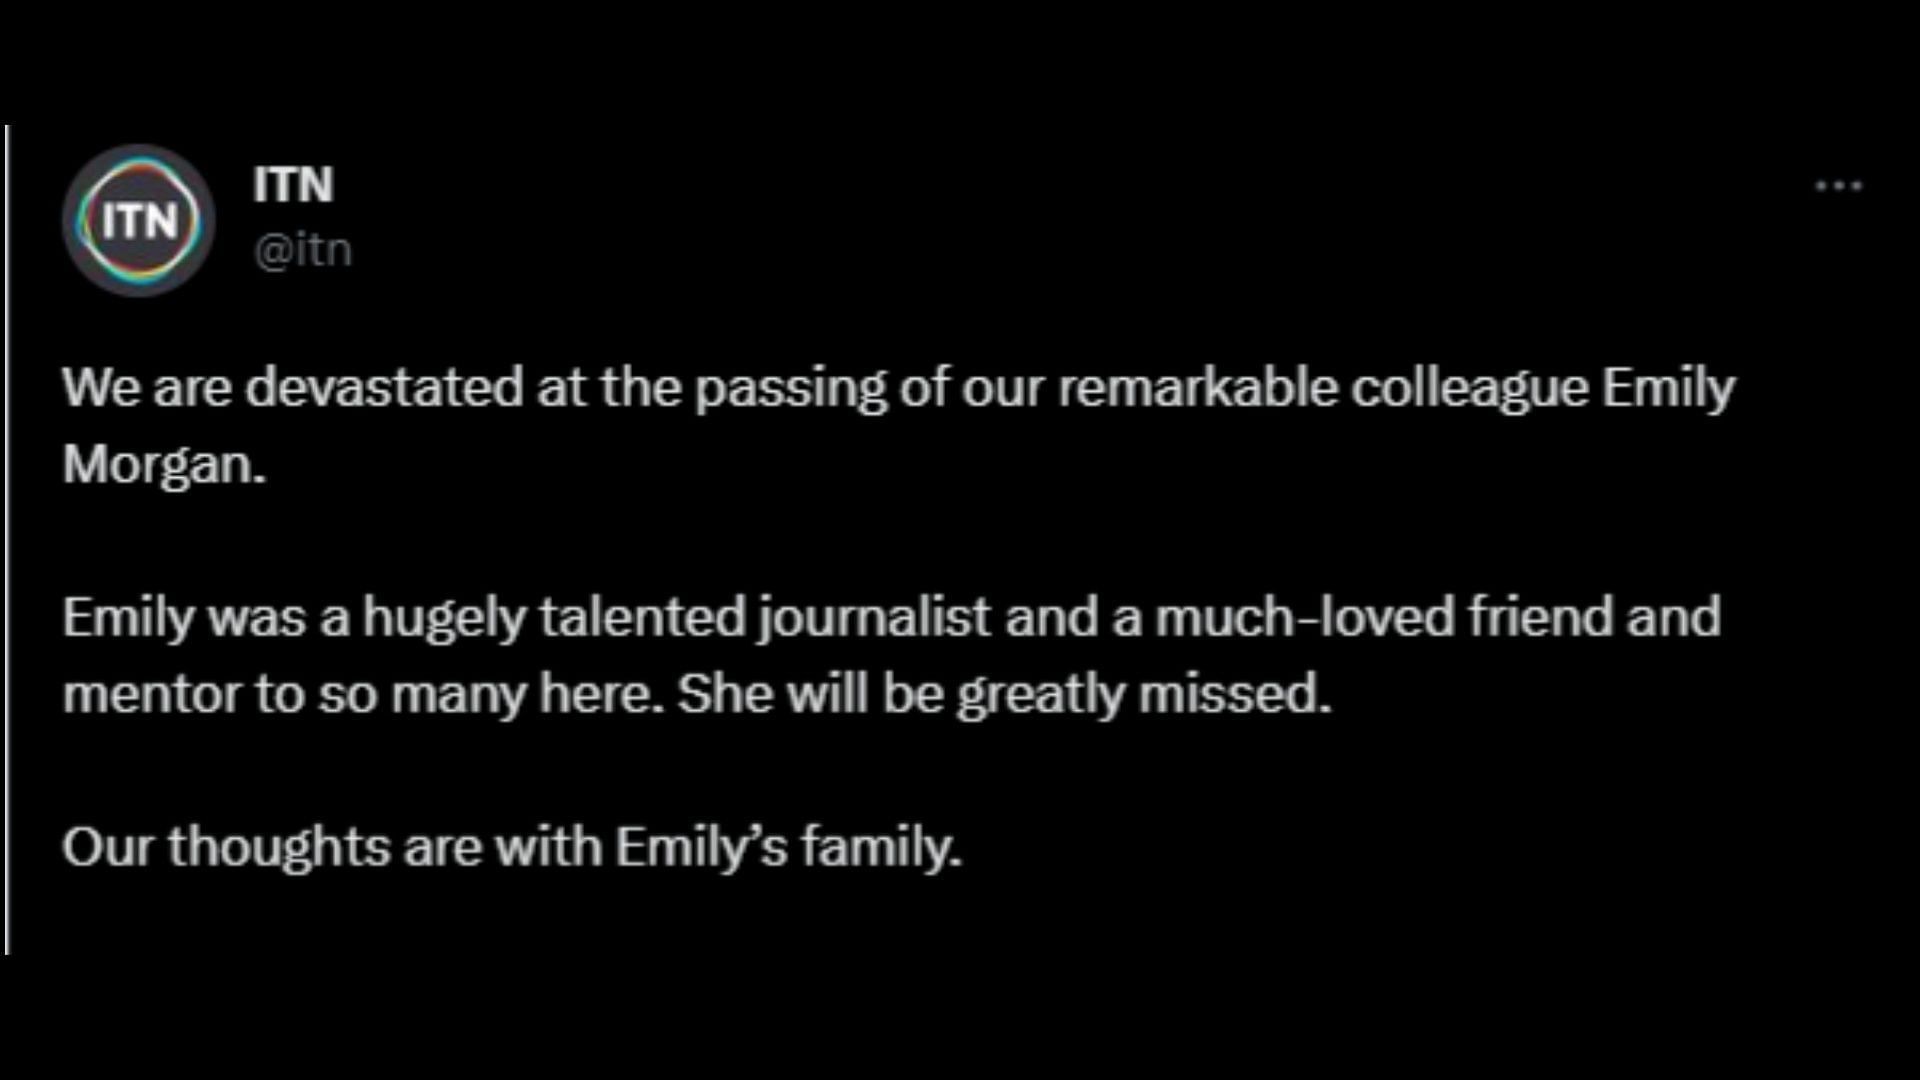 Screenshot of the Twitter statement issued by ITN announcing Emily Morgan&#039;s demise.